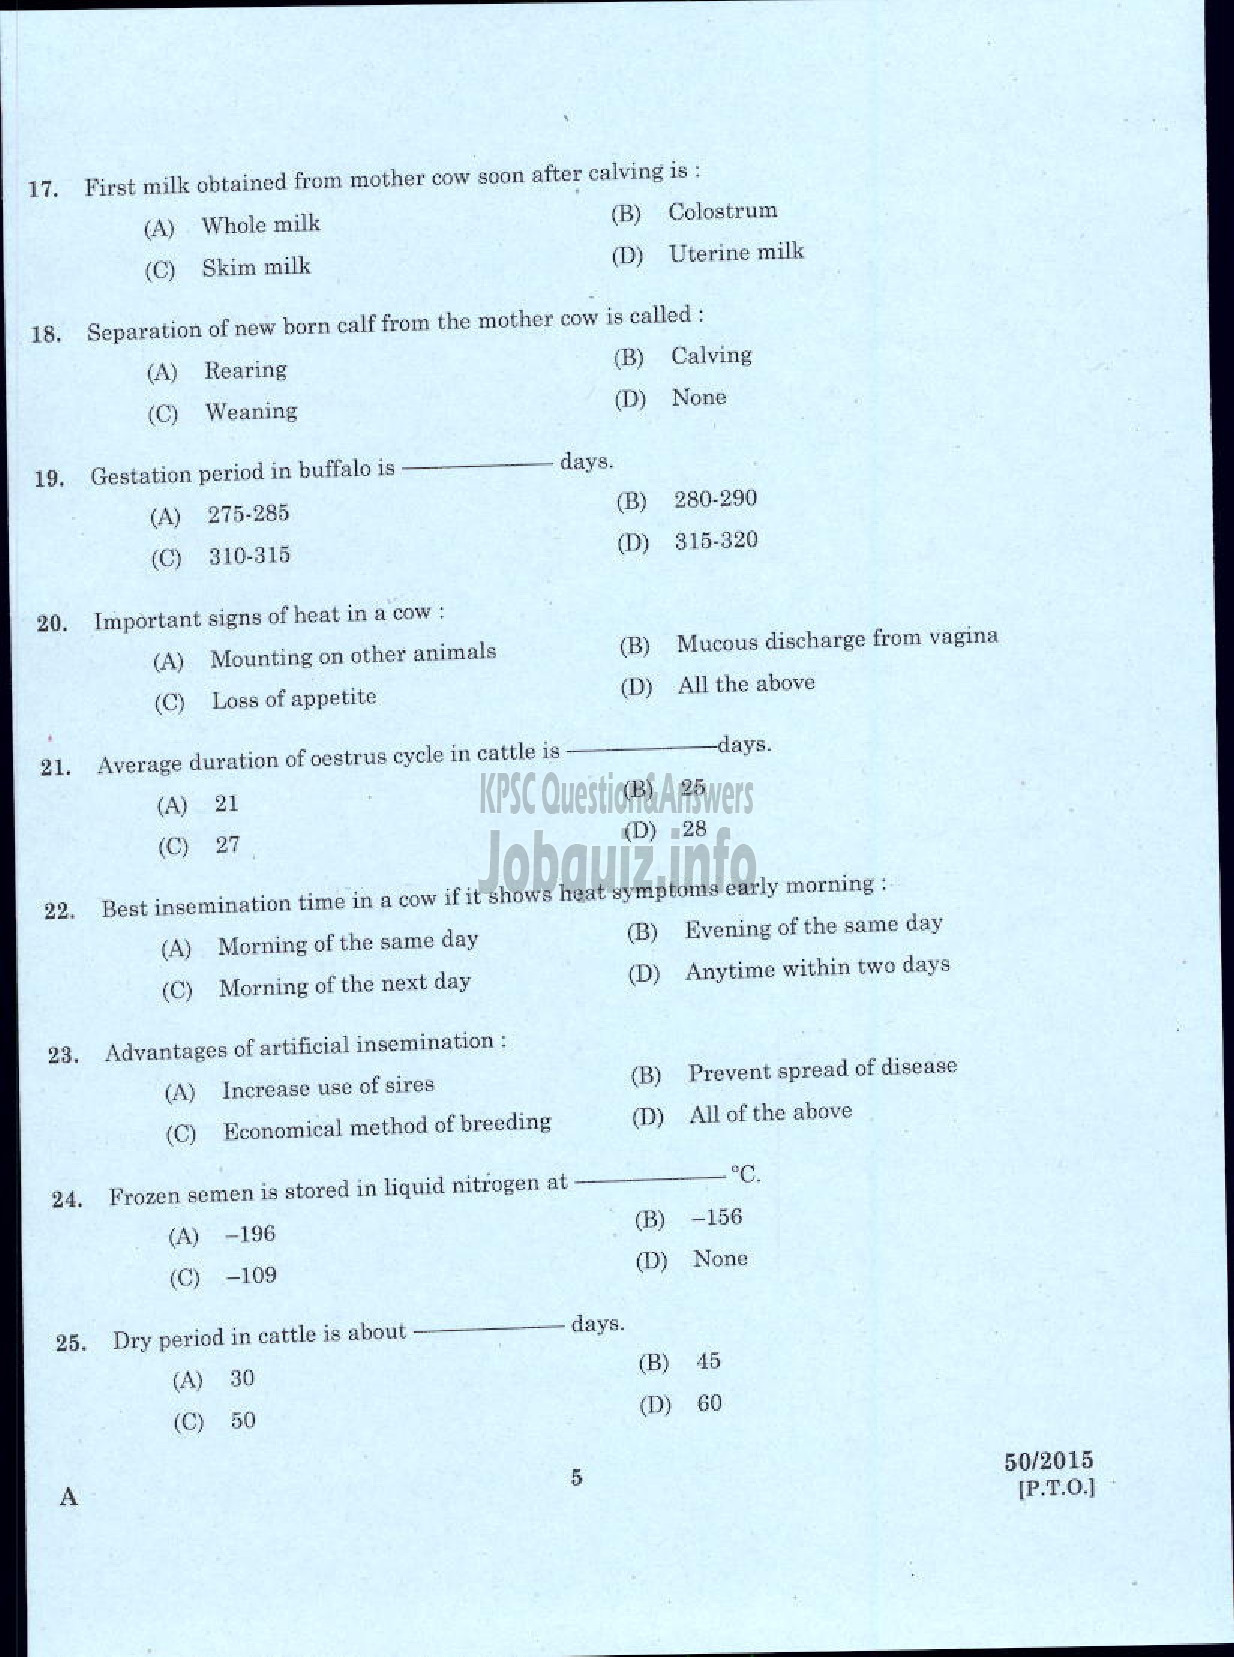 Kerala PSC Question Paper - LABORATORY TECHNICAL ASSISTANT DAIRYING AND MILK PRODUCTS VOCATIONAL HIGHER SECONDARY EDUCATION-3